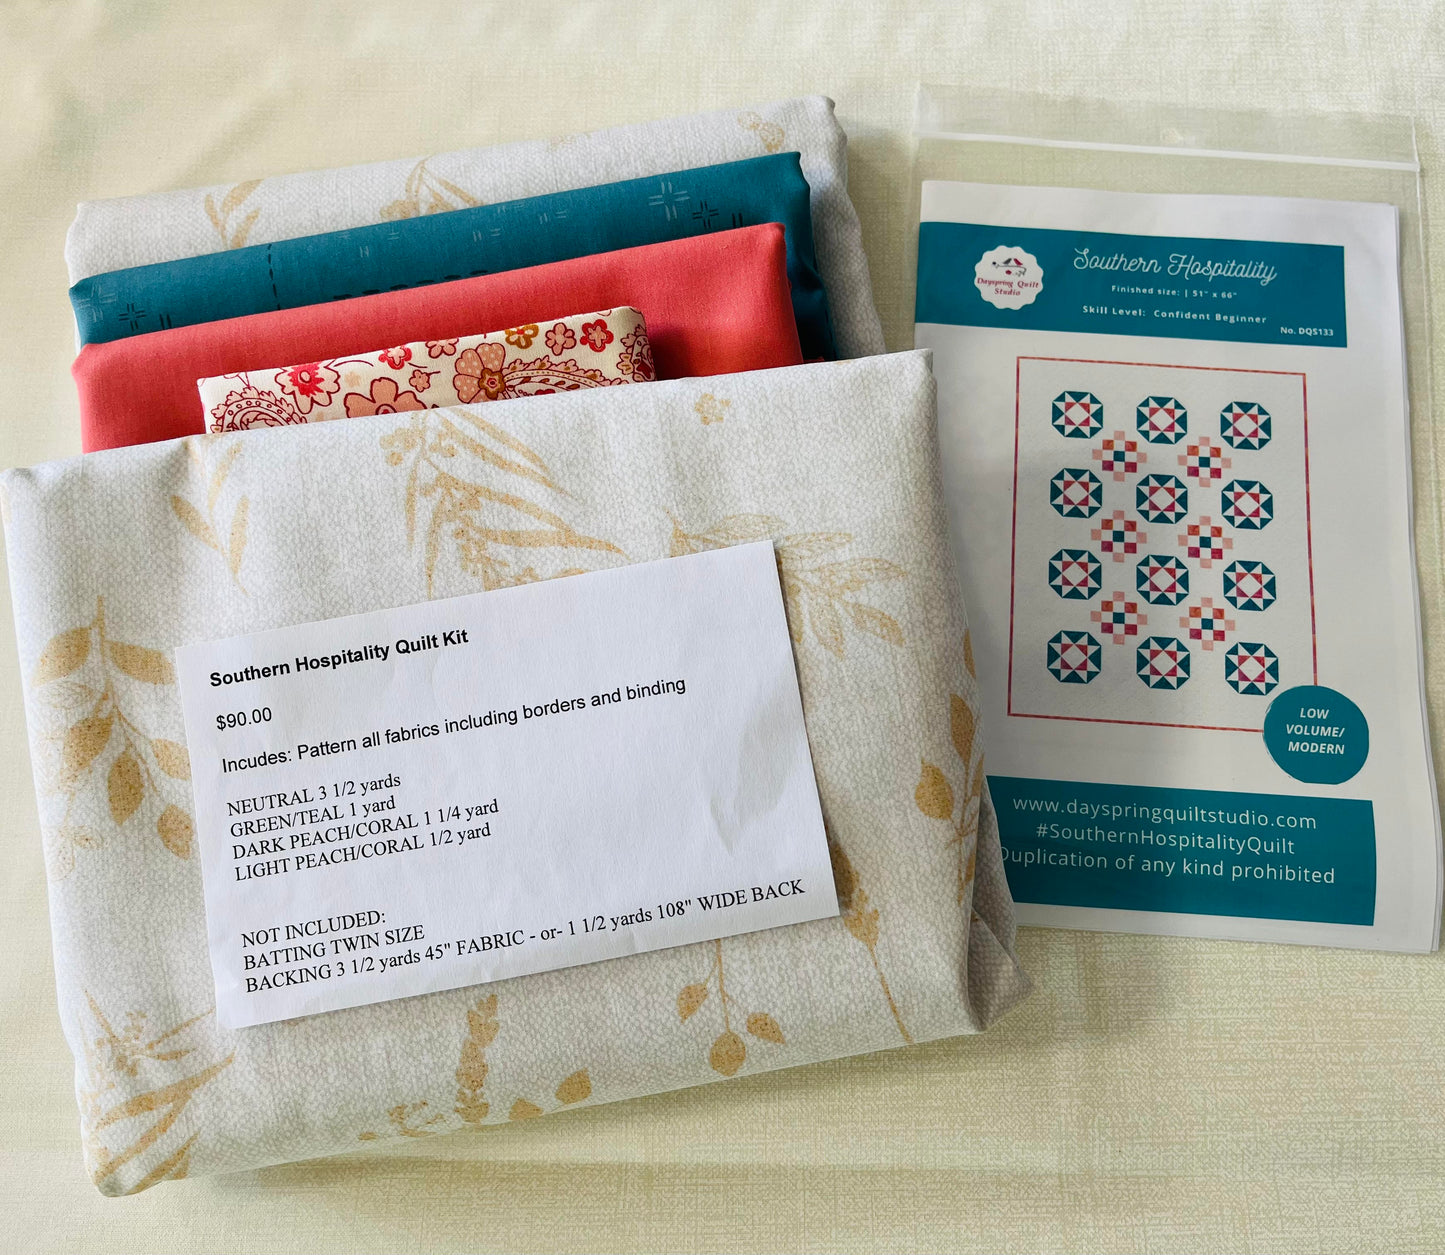 Southern Hospitality Quilt Kit